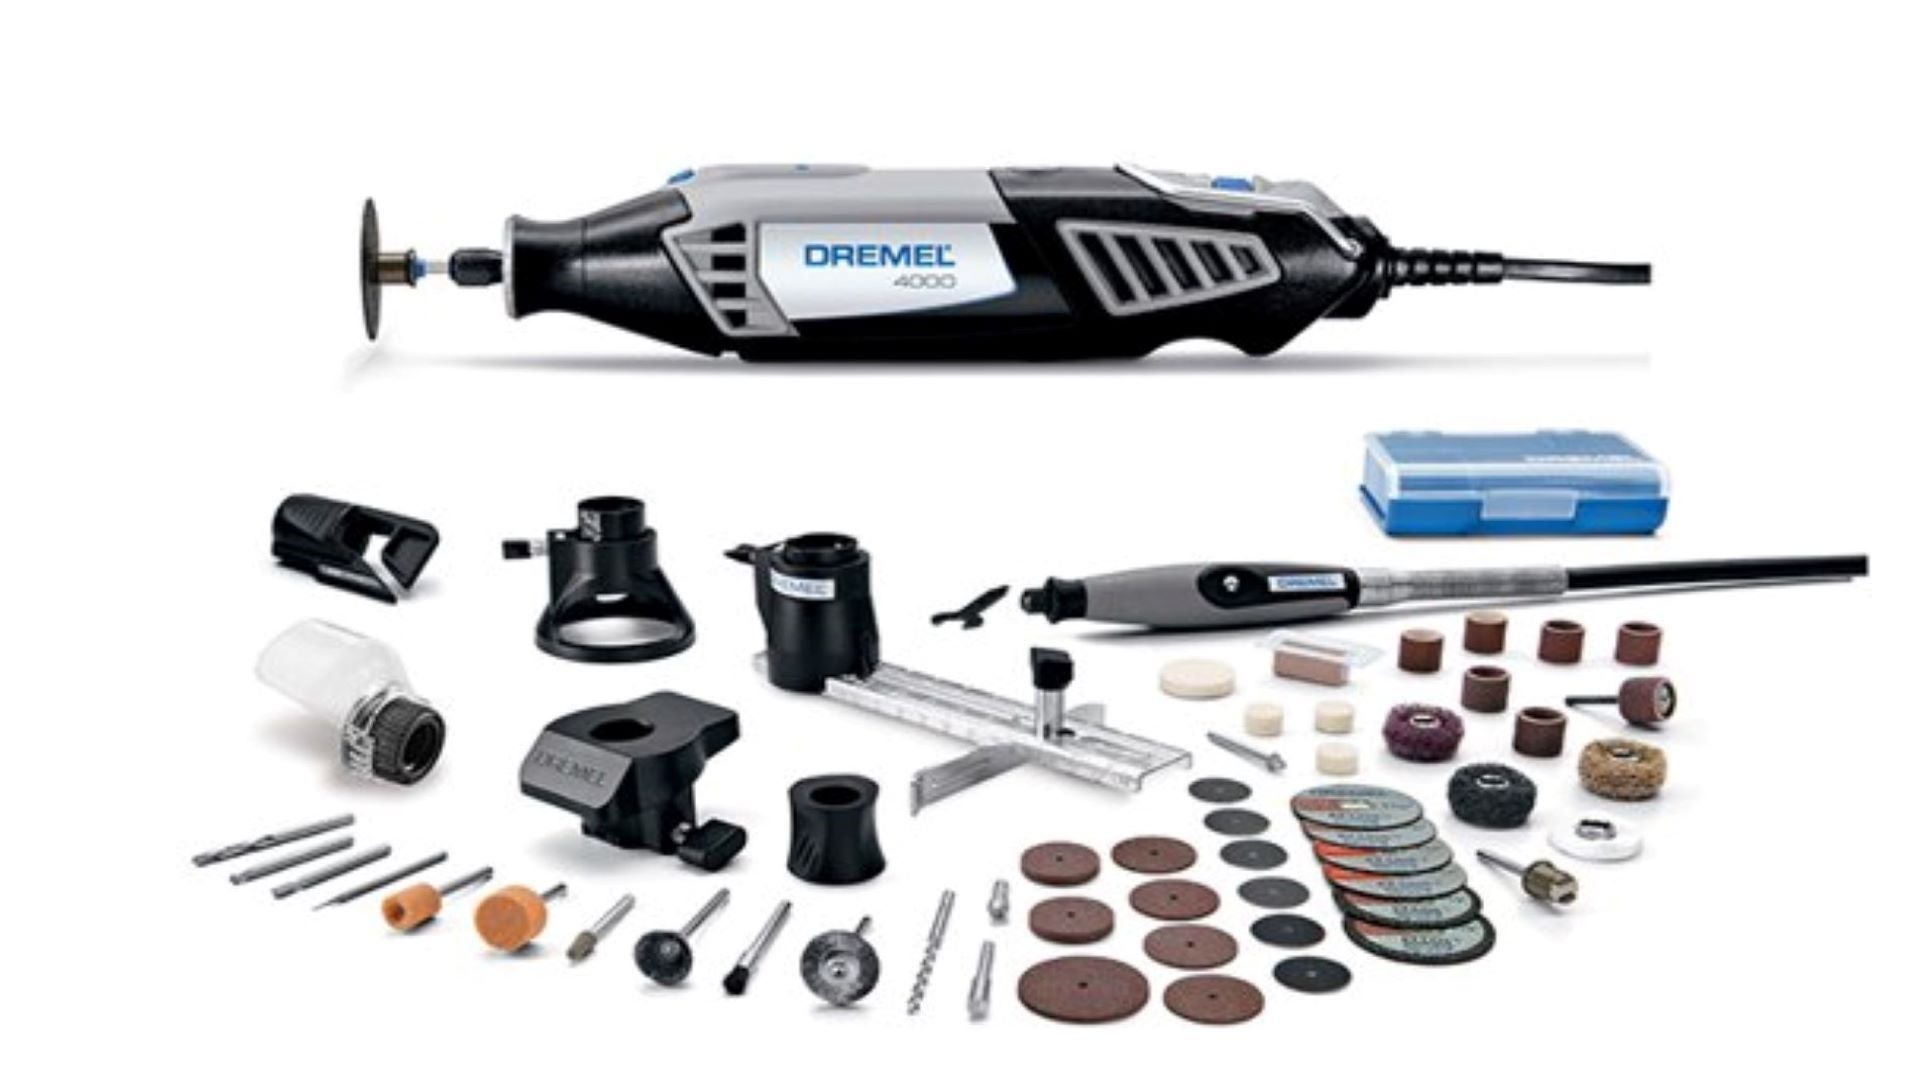 Astrolabe Hørehæmmet let at håndtere 56% Off Dremel Tools at Amazon This Cyber Monday | The Drive